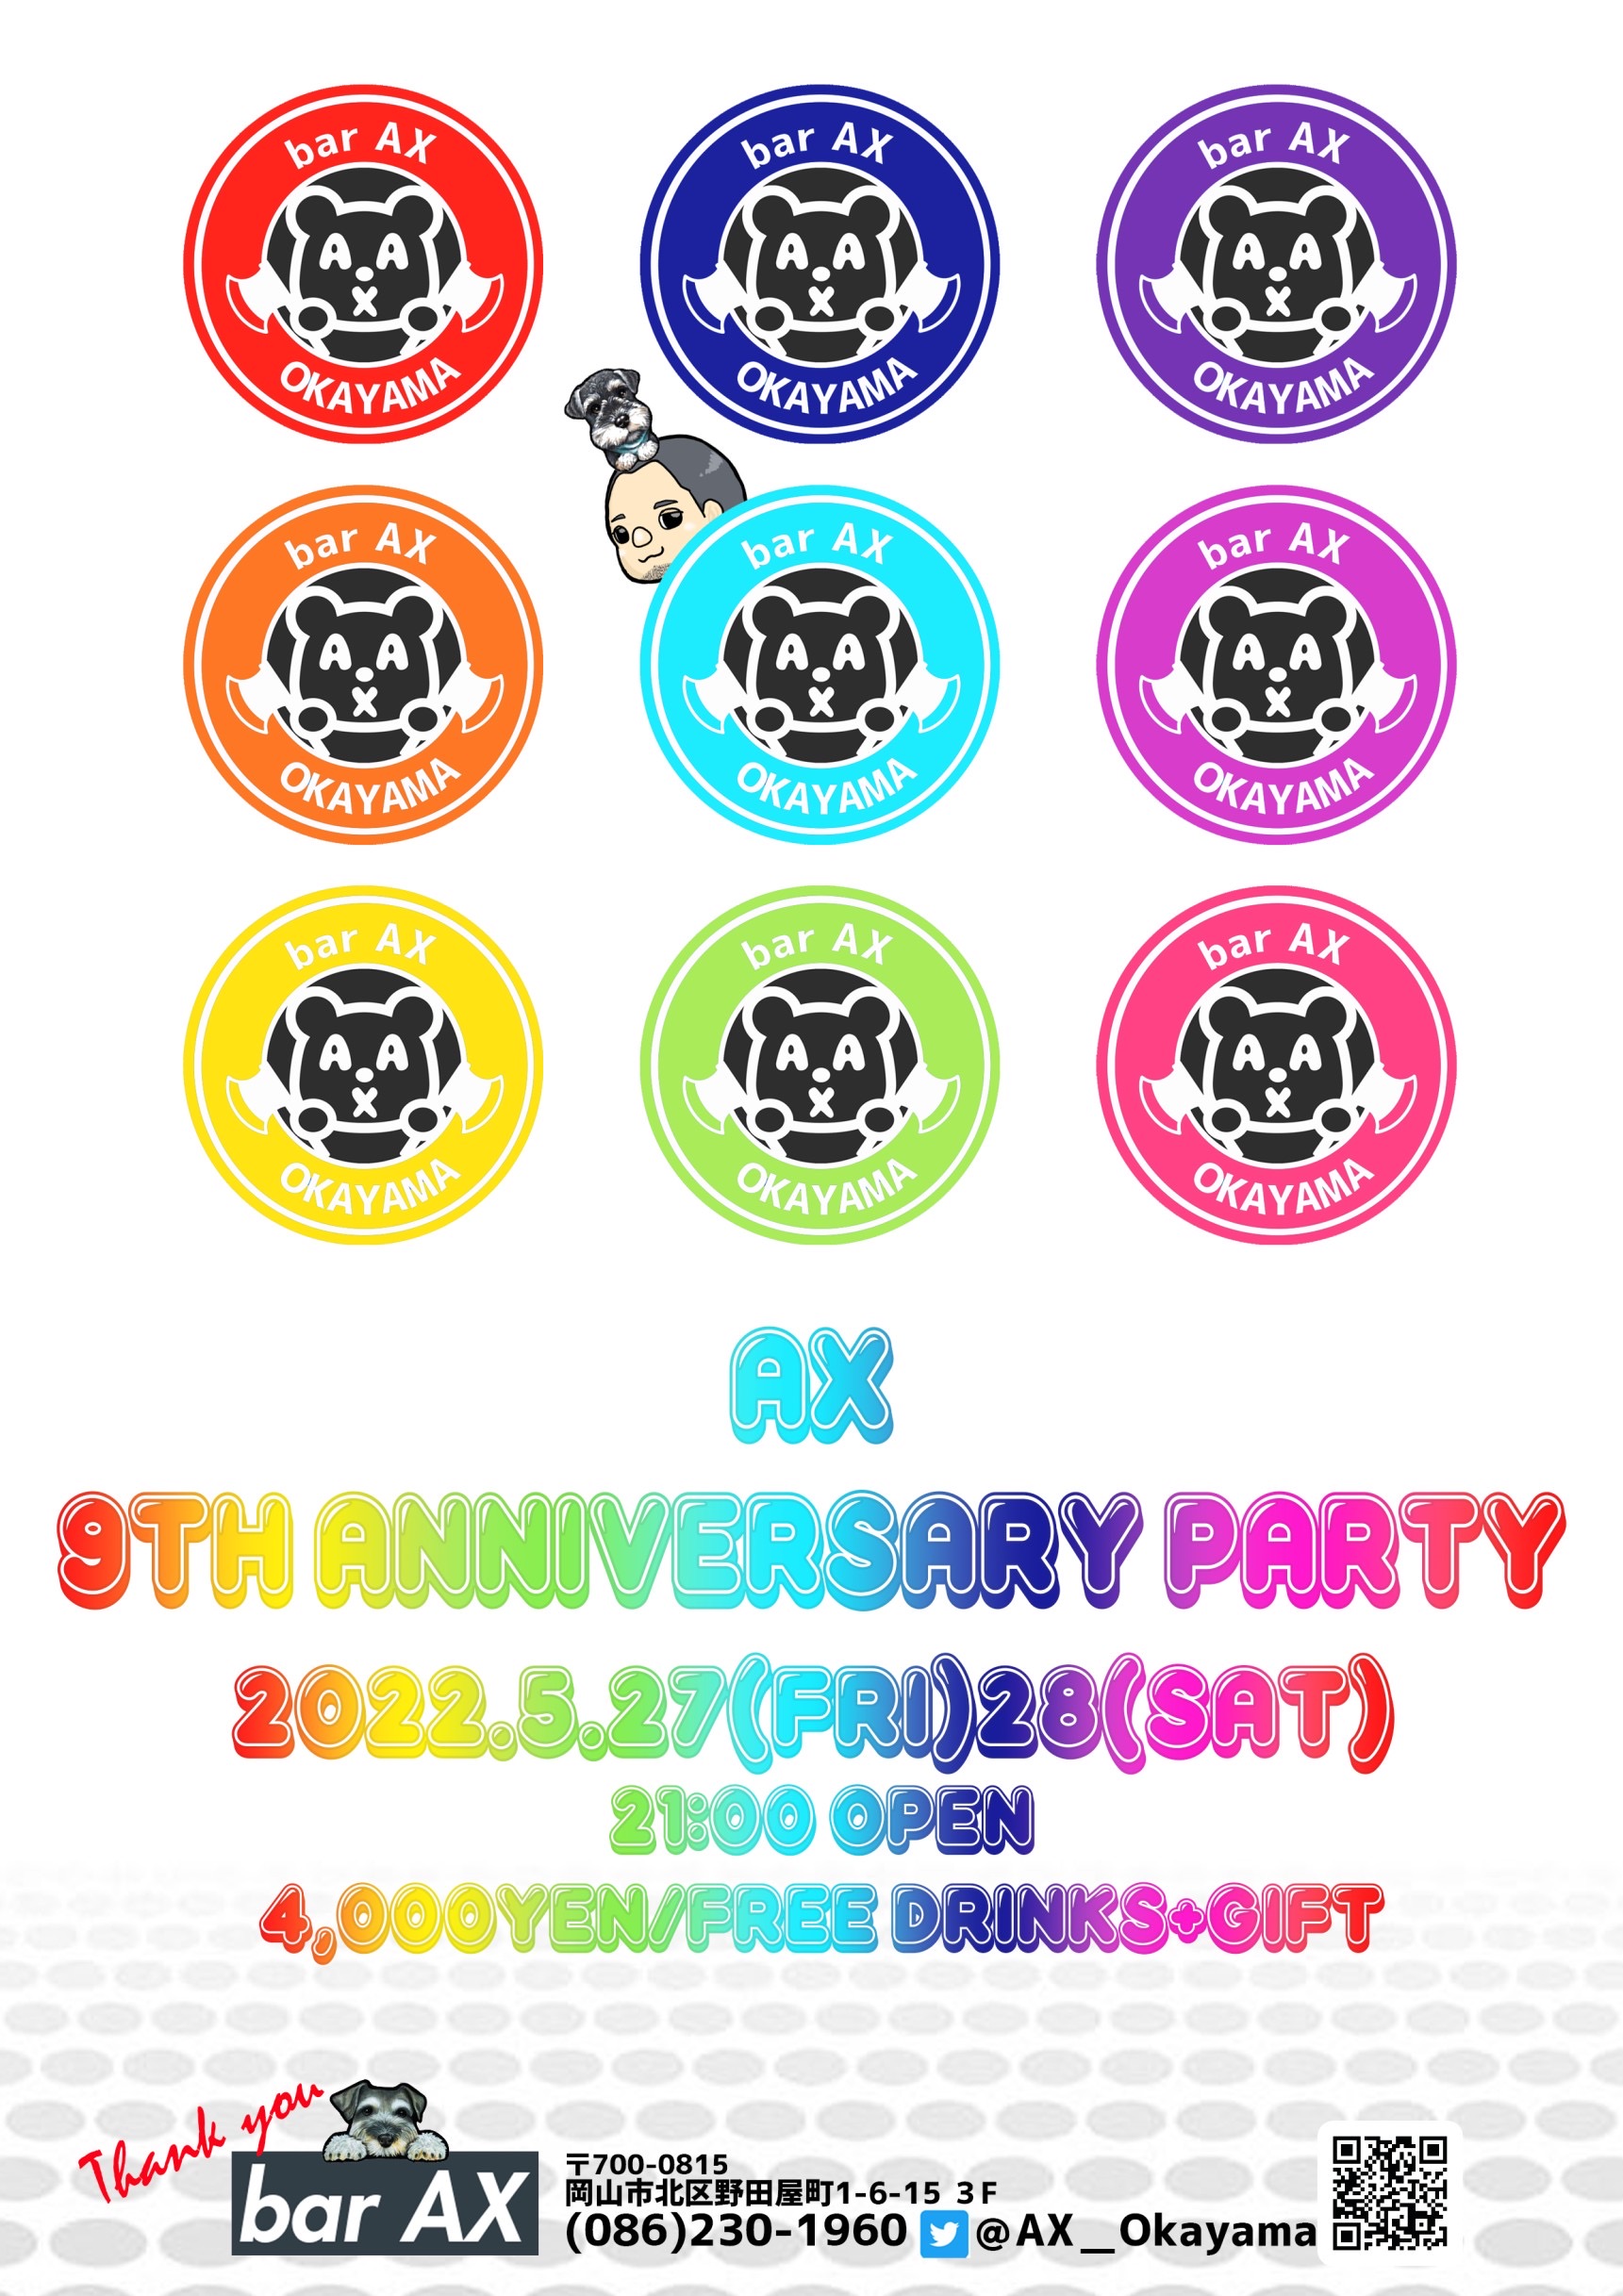 AX 9th Anniversary party